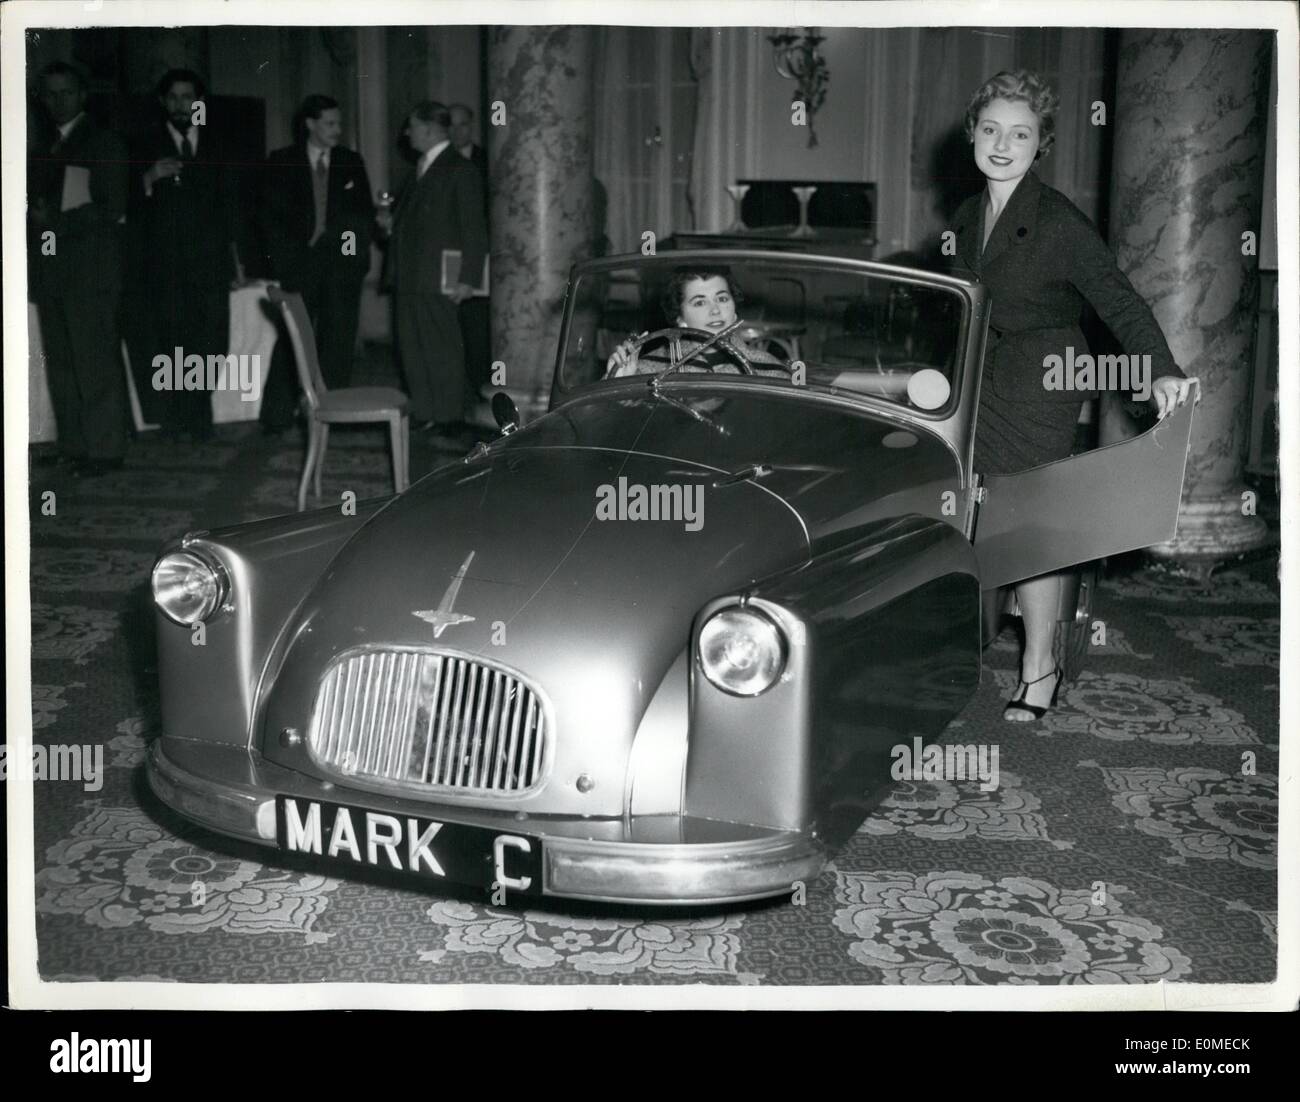 Nov. 11, 1954 - New Version Of The Famous ''Bond Minicar'' On Show.. Can Seat Five In Comfort: The 1955 version of the famous Bond Minicar was to be seen at the Waldorf Hotel this evening. Known as the ''Family Safety Model'' - the two adults and three children. It has a speed of 50 m.p.h. at 85 -90 miles per gallon. The body is now mainly of dent resisting fibreglass plastic.. Built by Sharp's Commercials Ltd. Lancs - the car standard model is priced at  284 -10-5d. and the de-luxe model at 299 - 15 -Od. both inclusive of tax Stock Photo